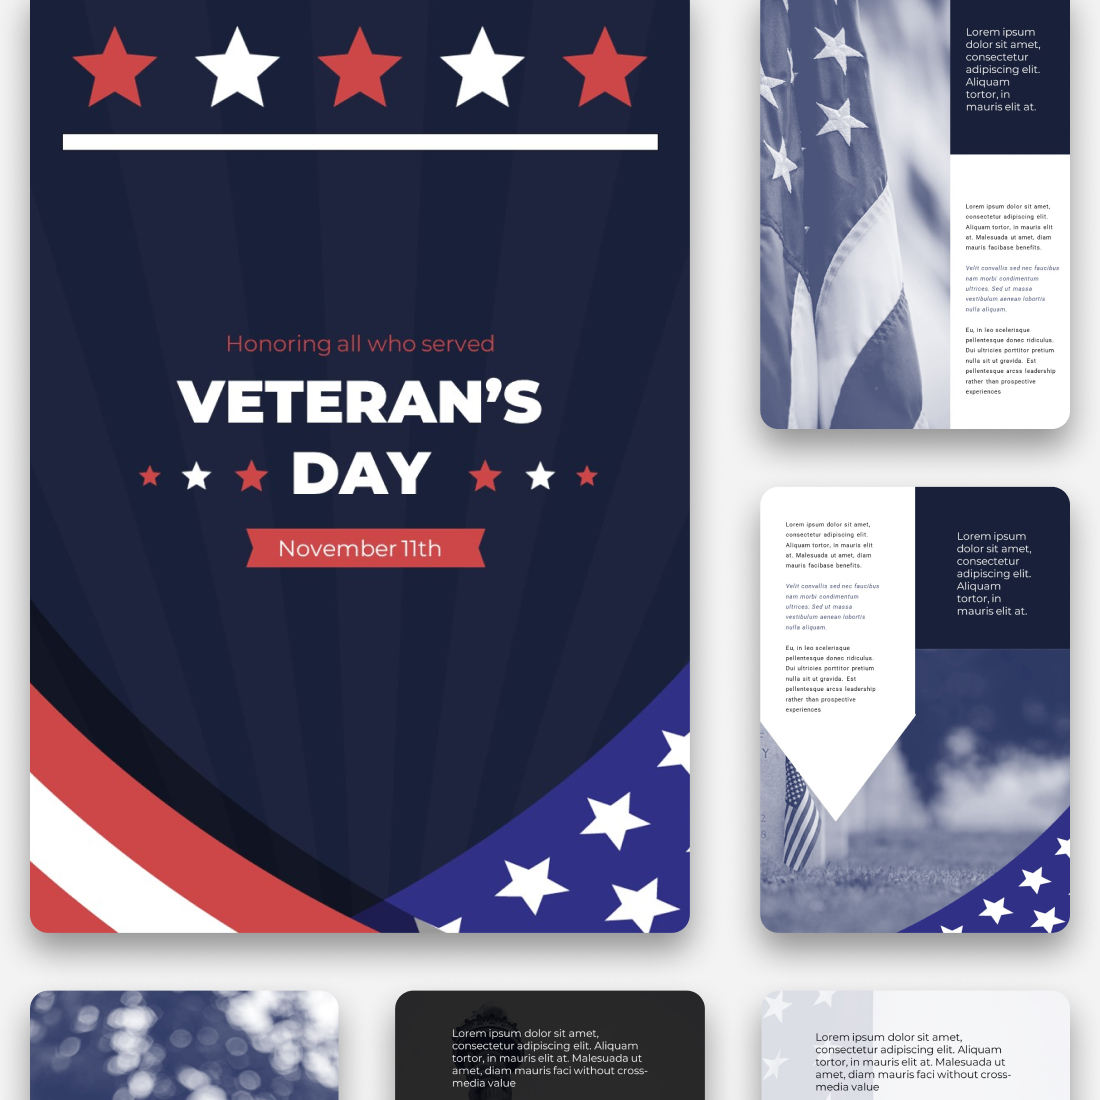 Images illustration with veteransday googleslides template.